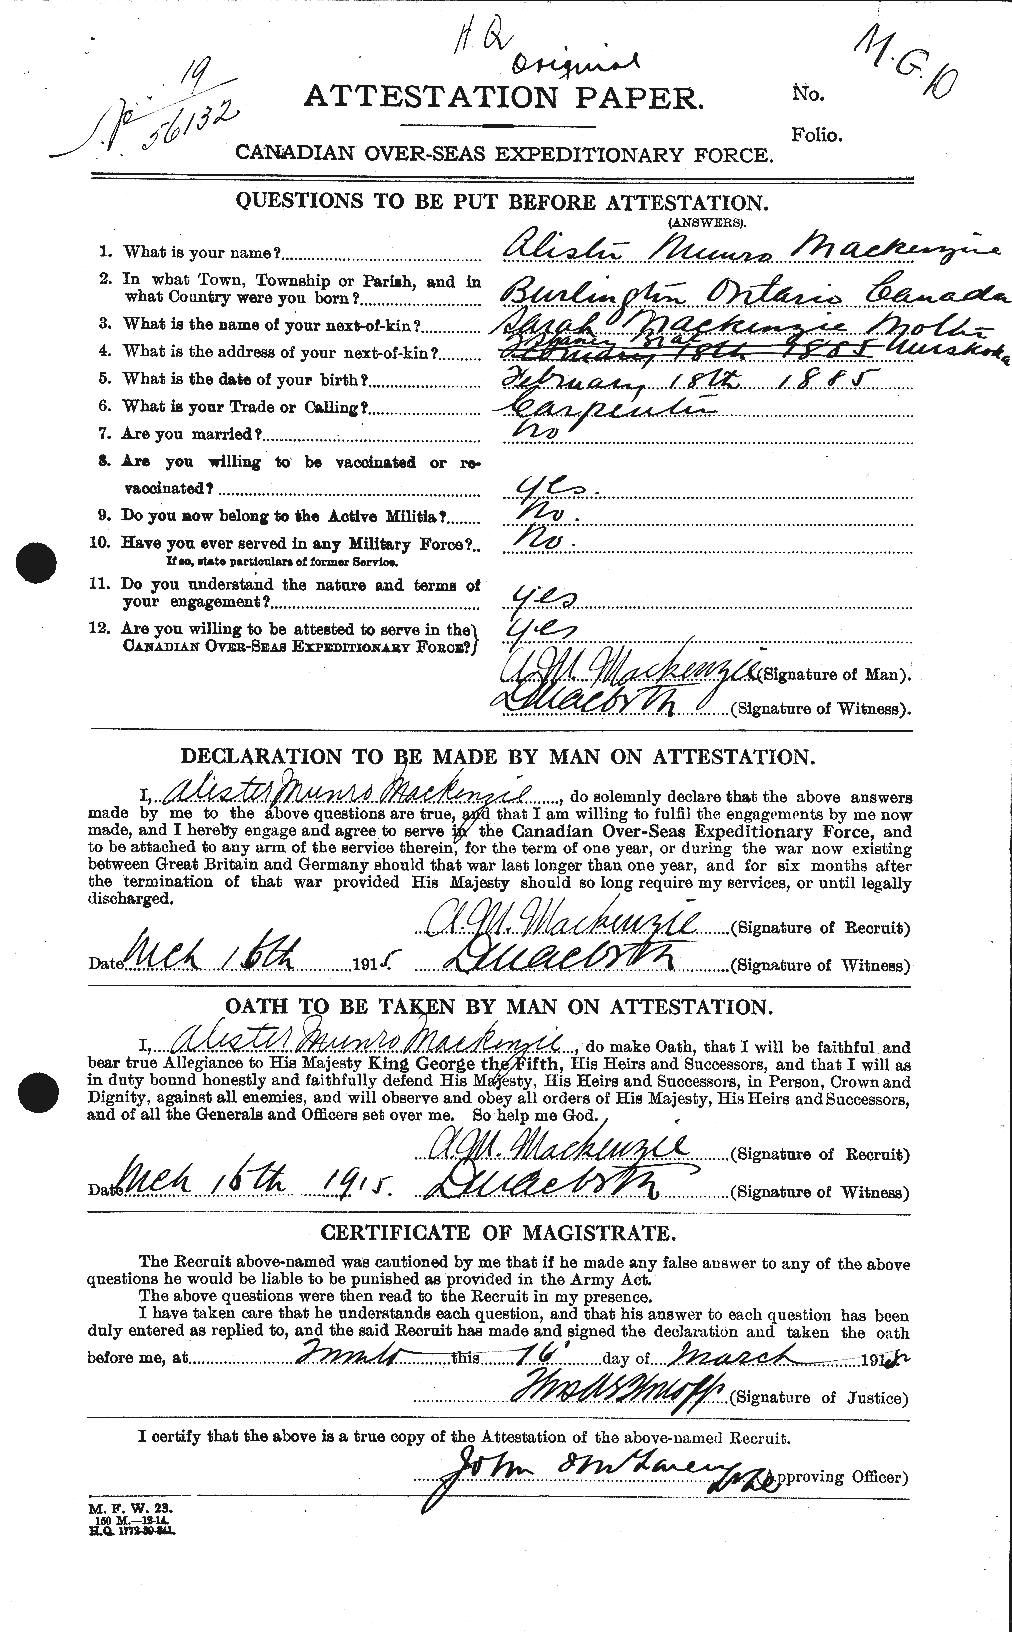 Personnel Records of the First World War - CEF 528833a